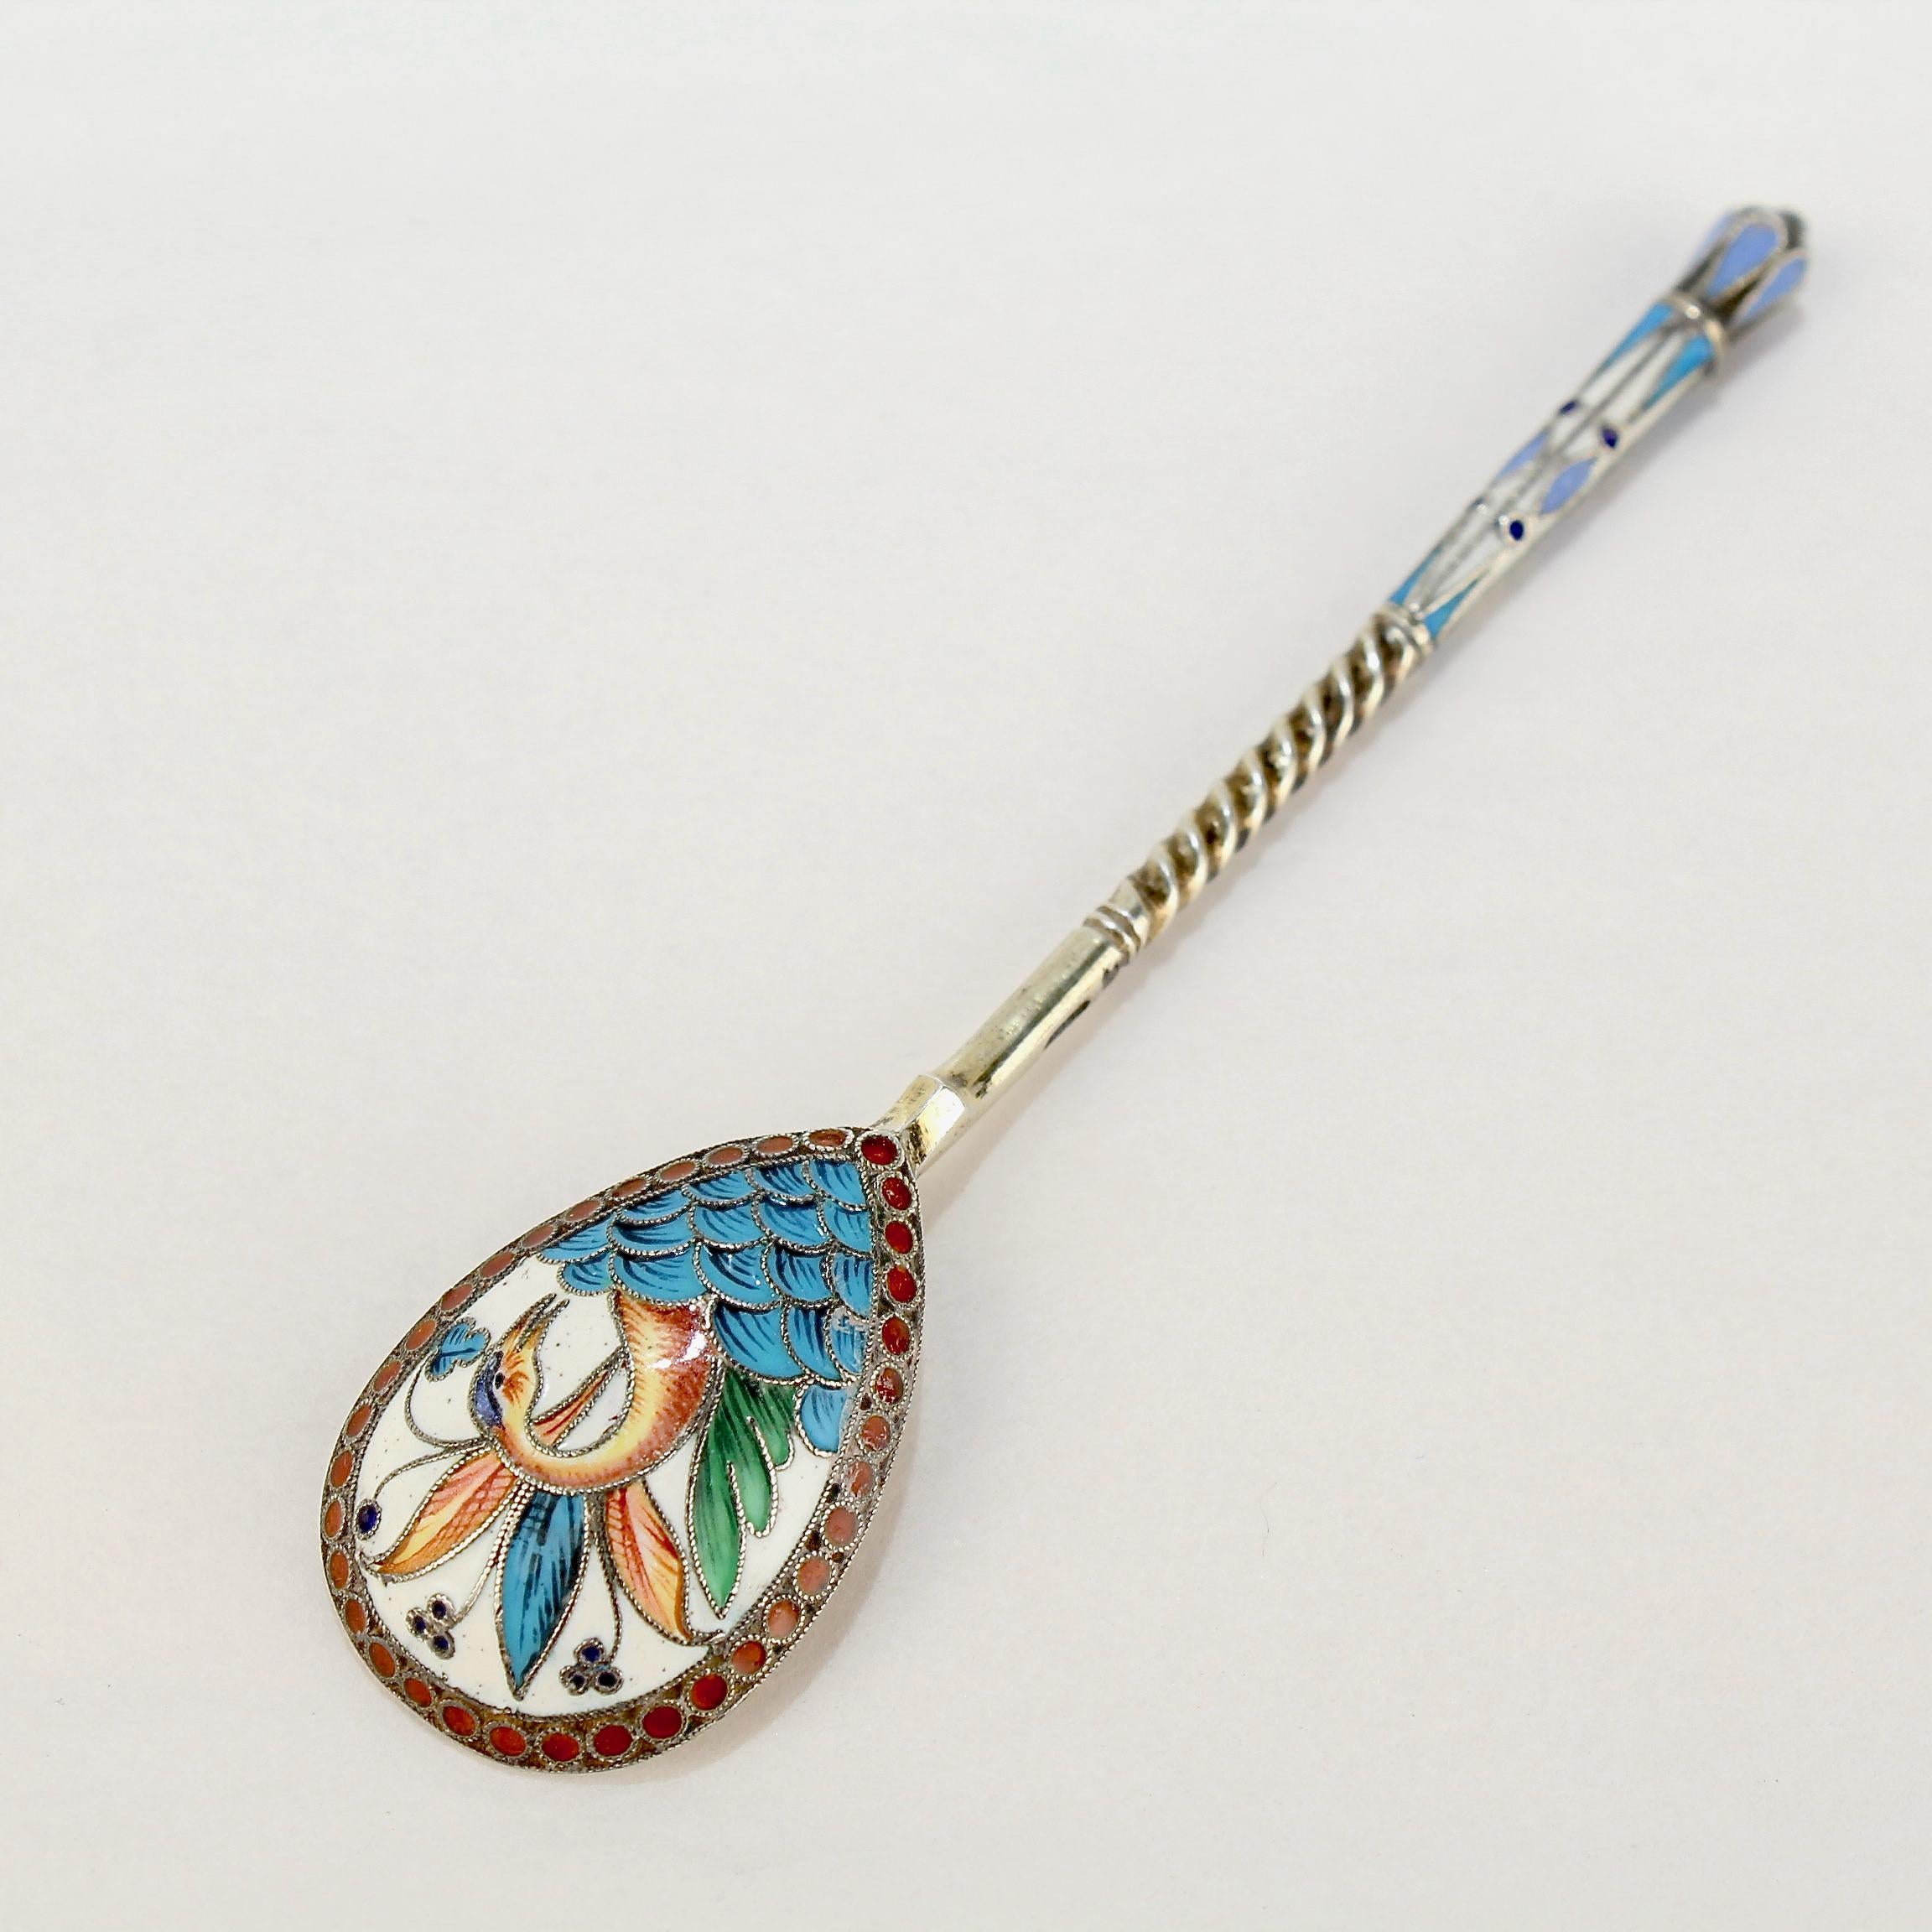 A very fine antique Russian tea or kvosh spoon.

Attributed to Maria Sokolova.

With polychrome shaded cloisonné enamel decoration to both the front and reverse.

Simply a wonderful piece of Imperial Russian silver!

Date:
Late 19th or Early 20th